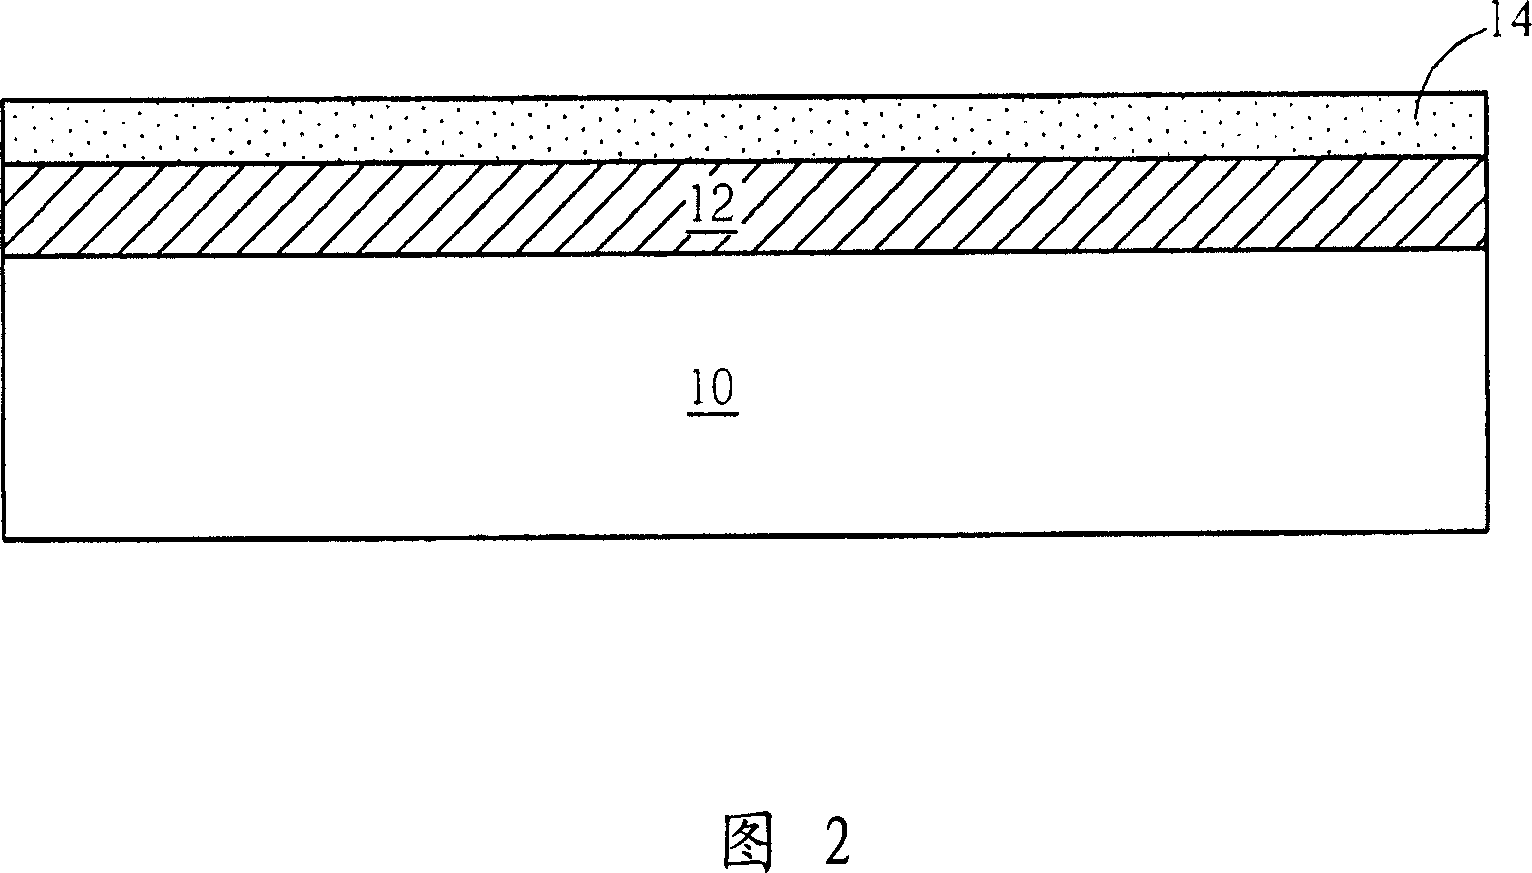 Method for producing microphone unit, thermal-oxidative layer and low-stress structural layer